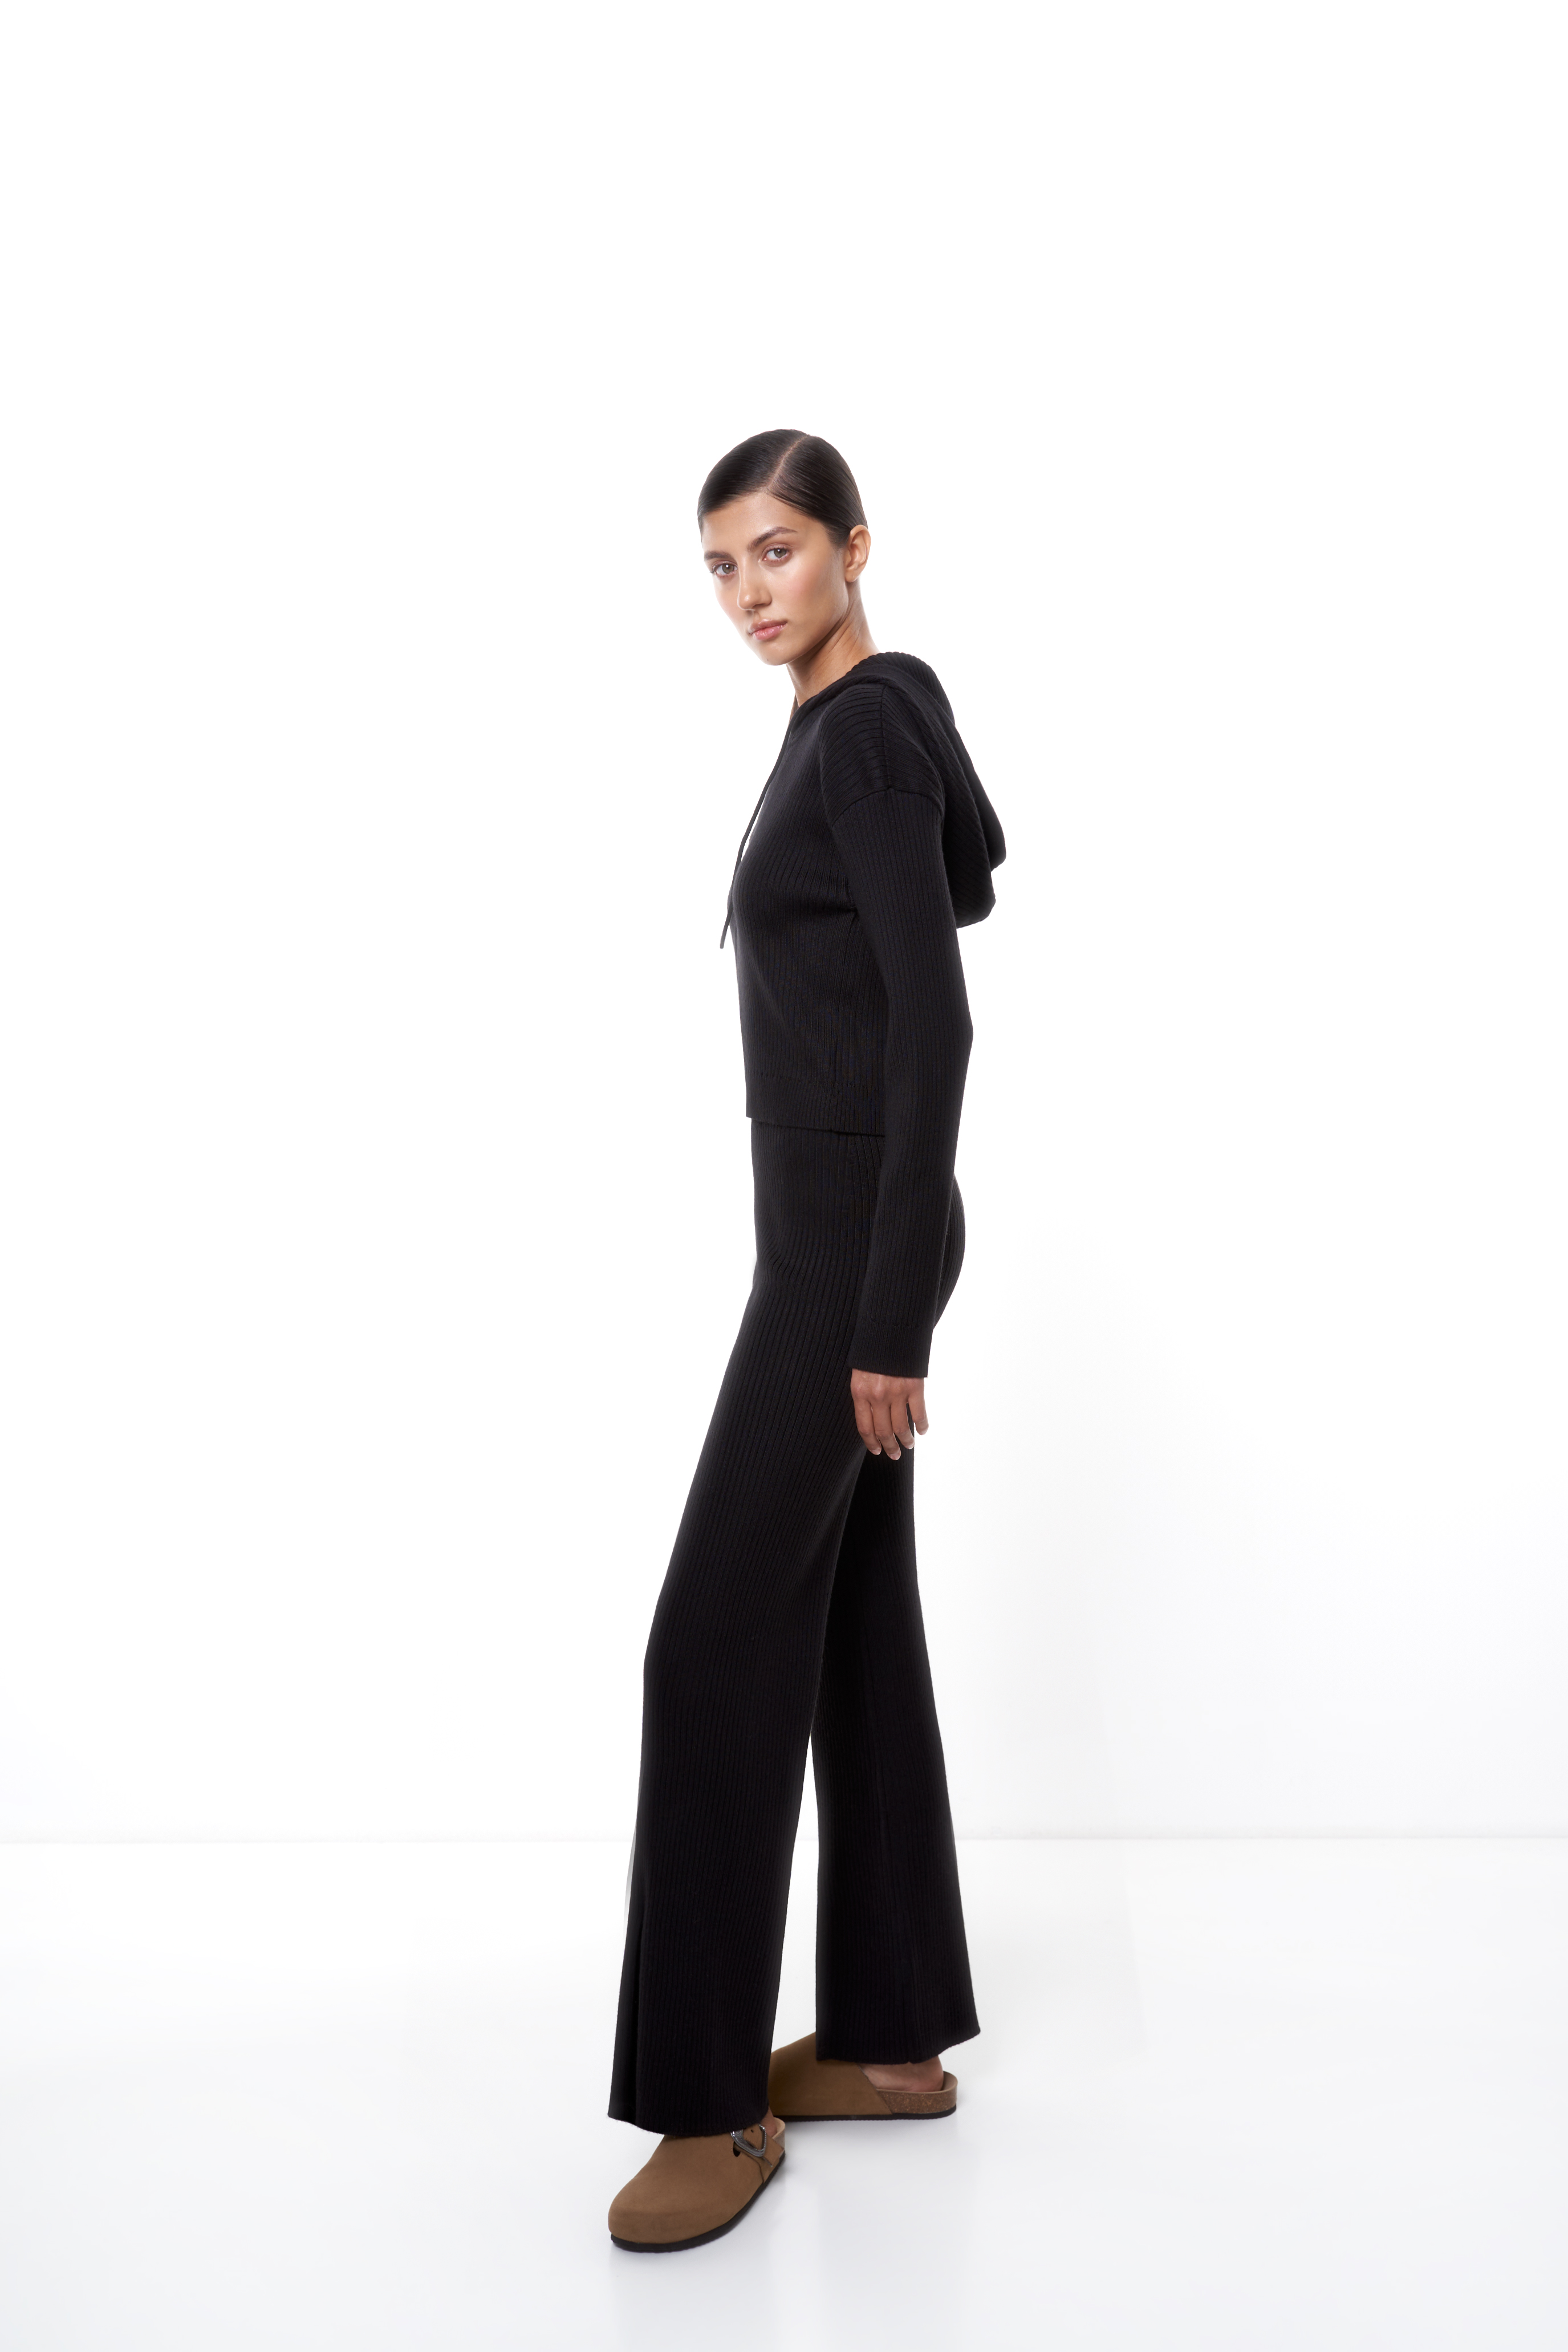 Trousers 4511-01 Black from BRUSNiKA